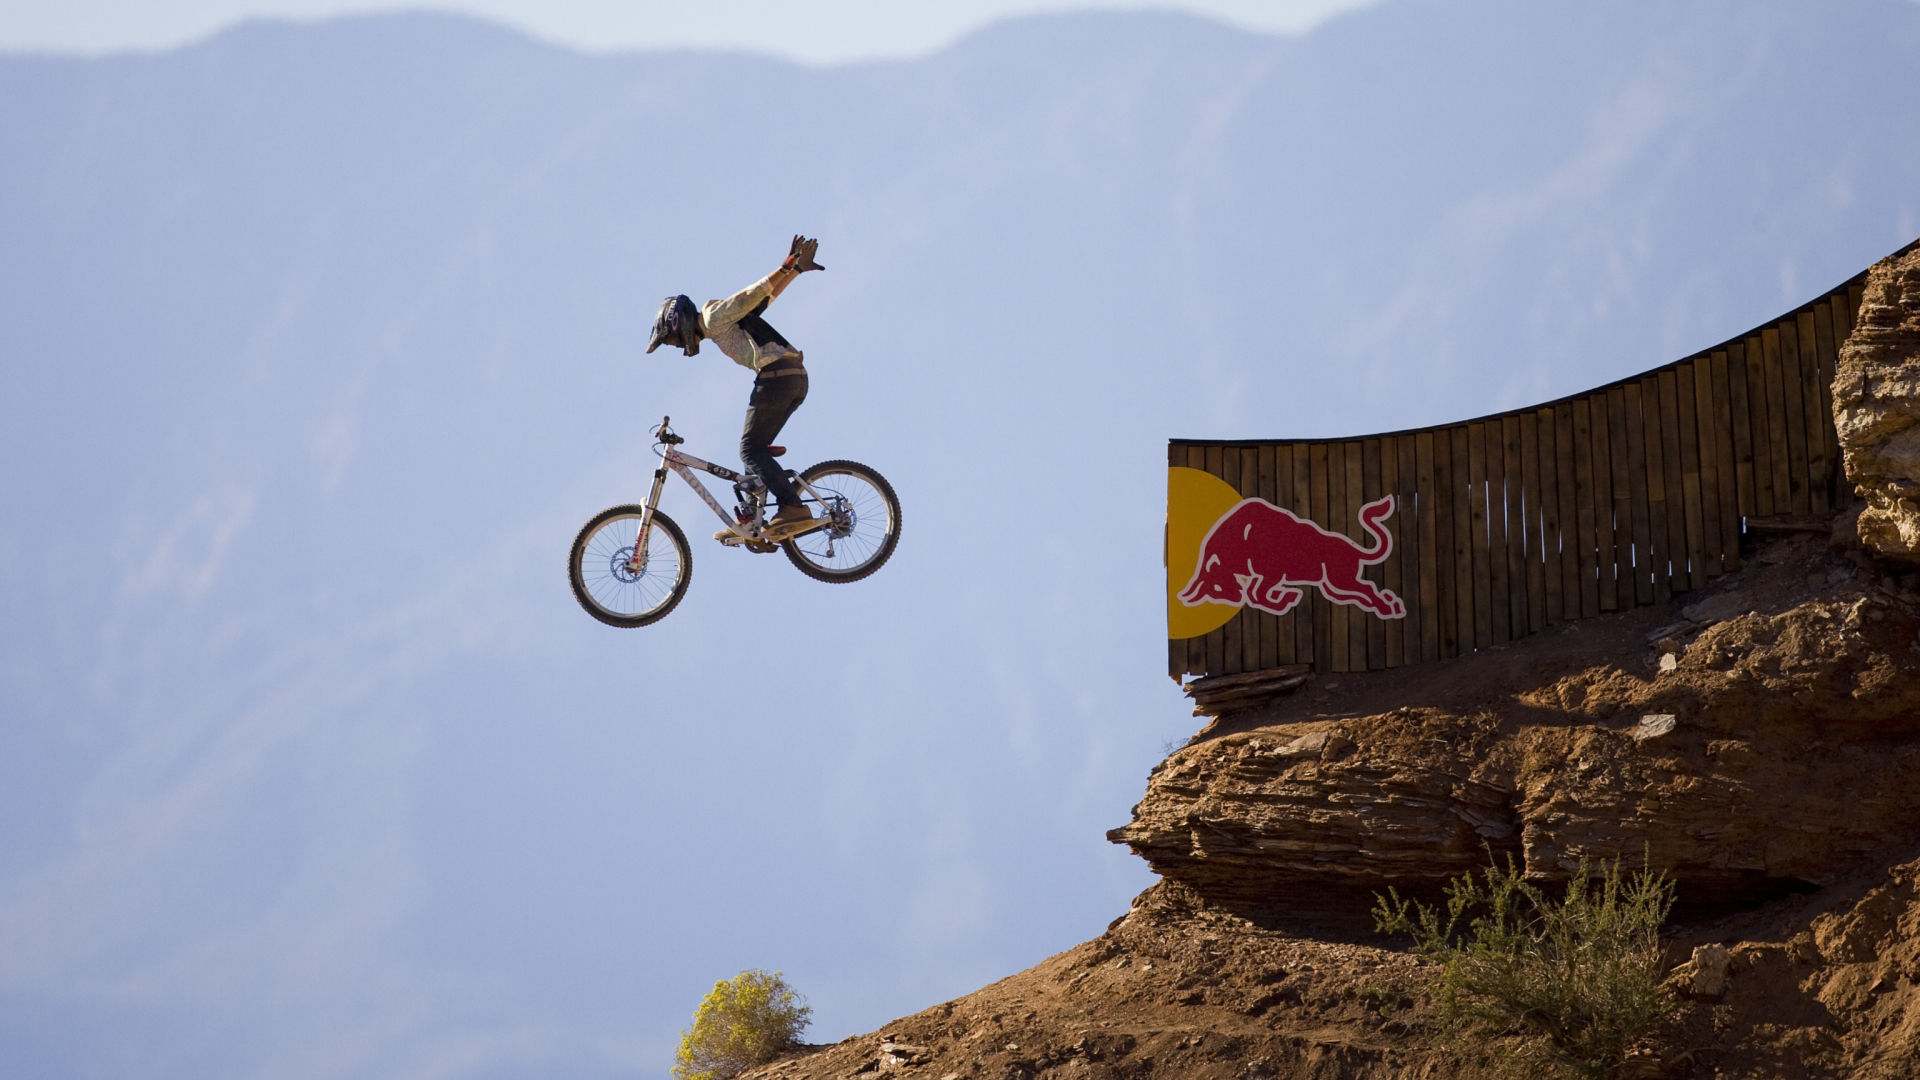 Red Bull Extreme Bicyclist wallpaper 1920x1080